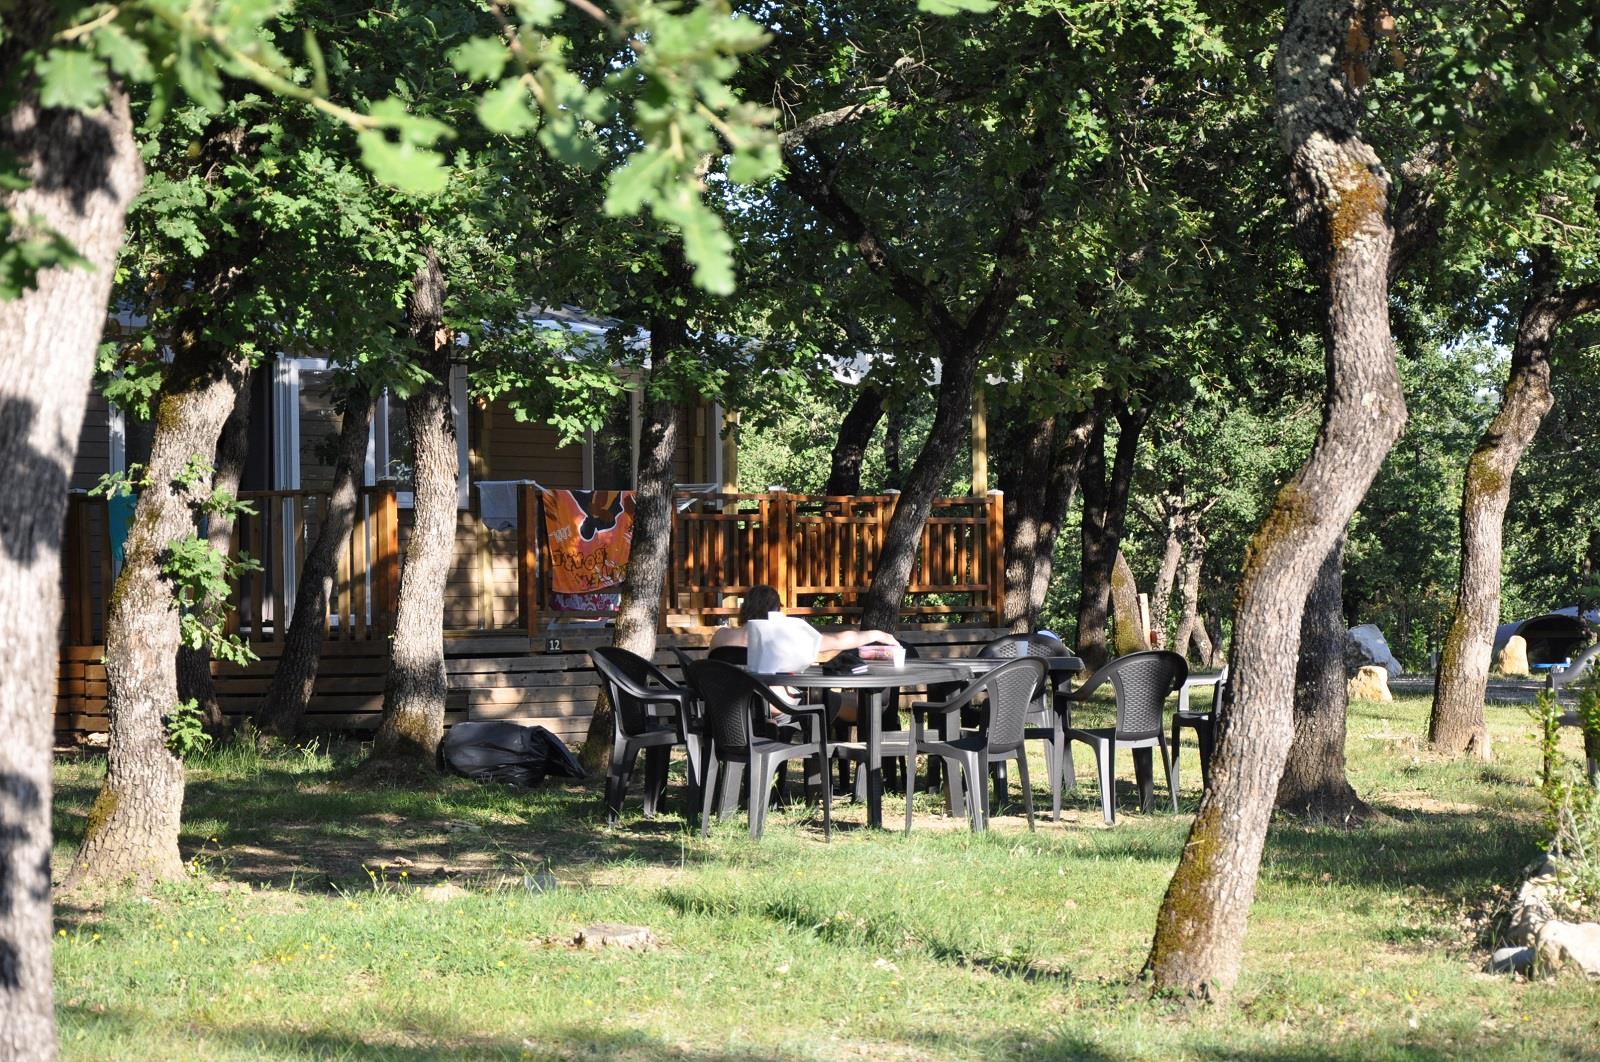 Huuraccommodatie - Cottage Confort S (35M² / 3 (Slaap)Kamers - Terras 18M²) - Camping L'Ombrage